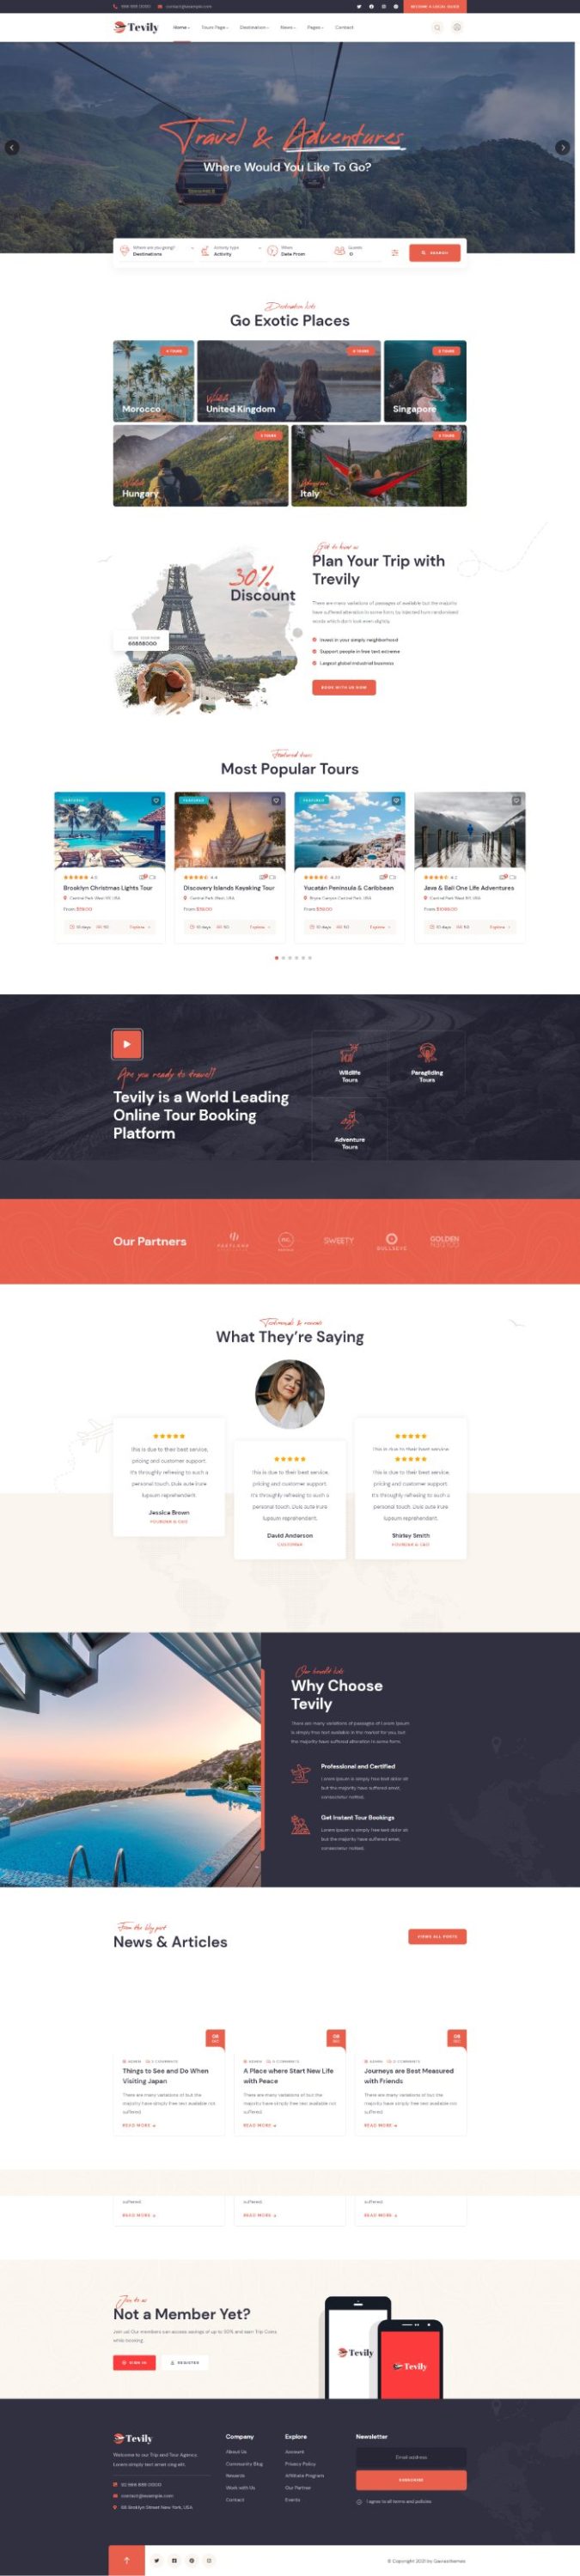 Template website du lịch - Tevily